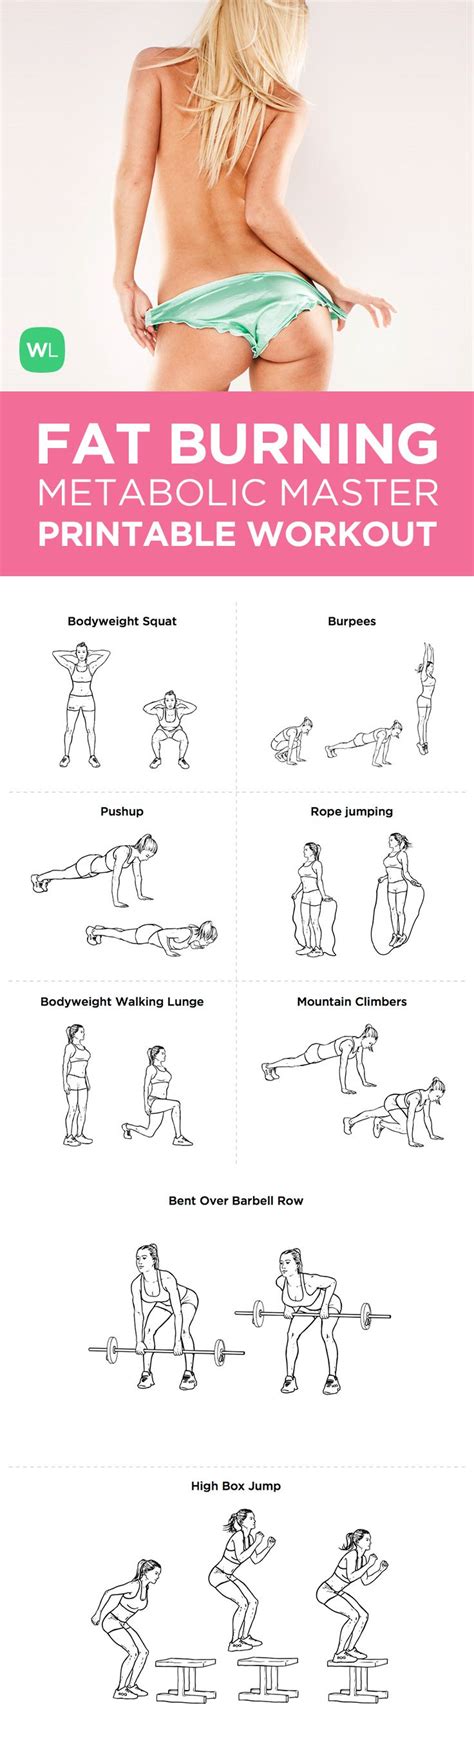 17 Best images about Fat Burning Workouts on Pinterest ...